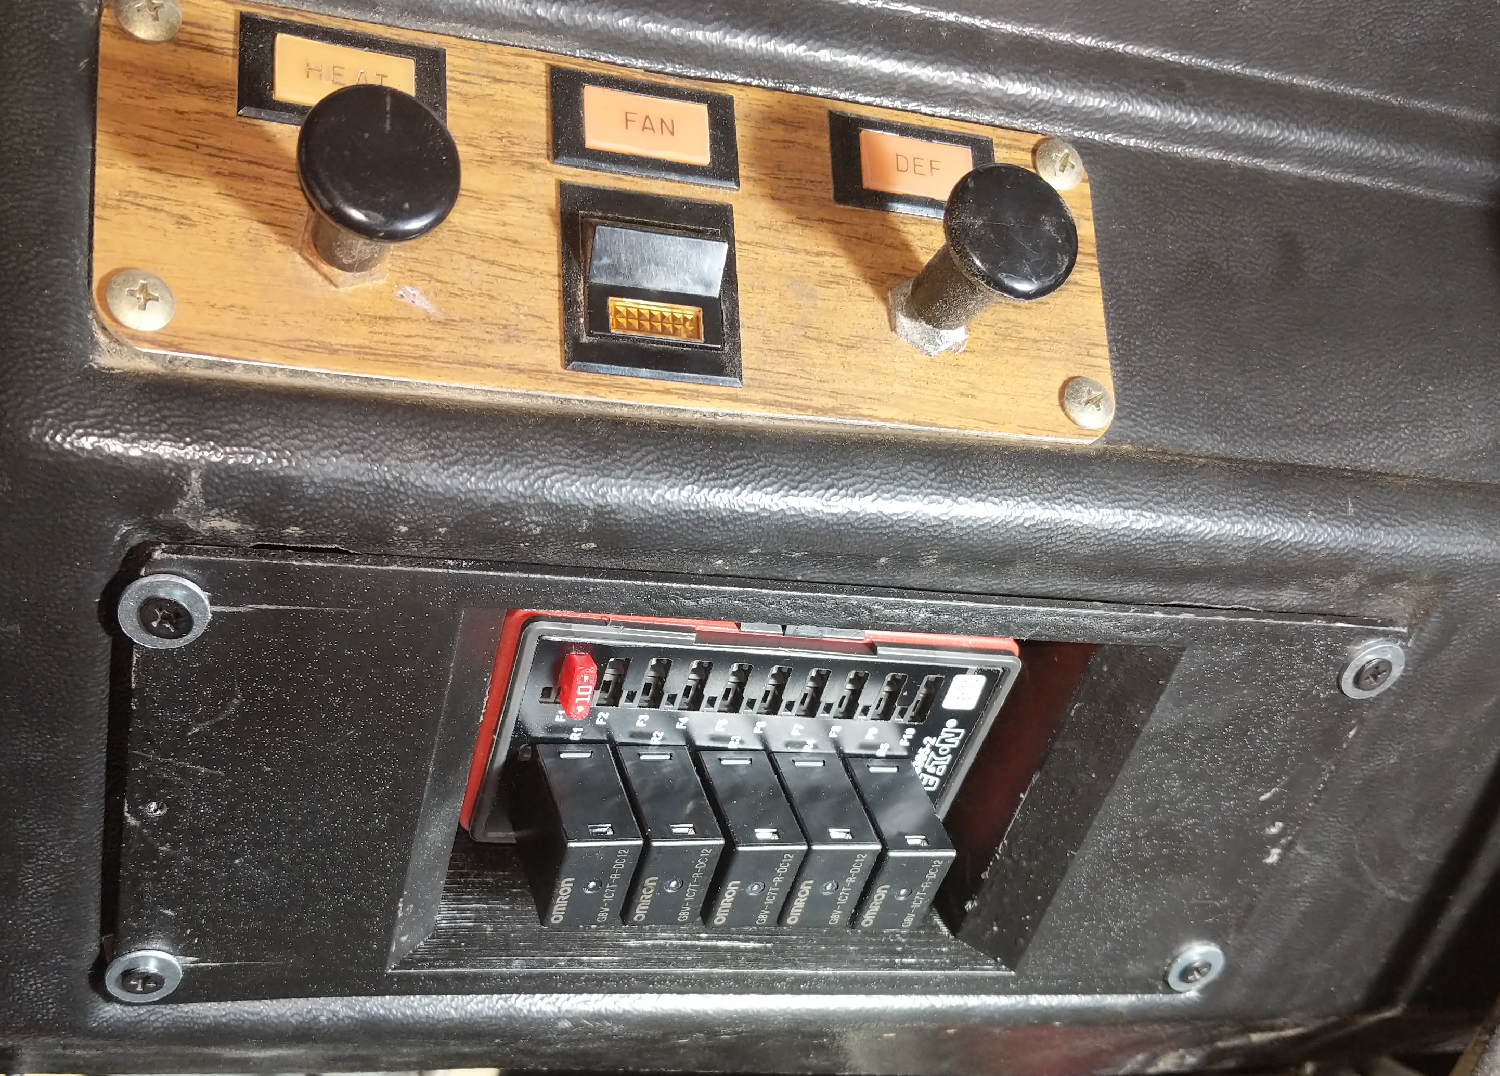 A new fuse panel